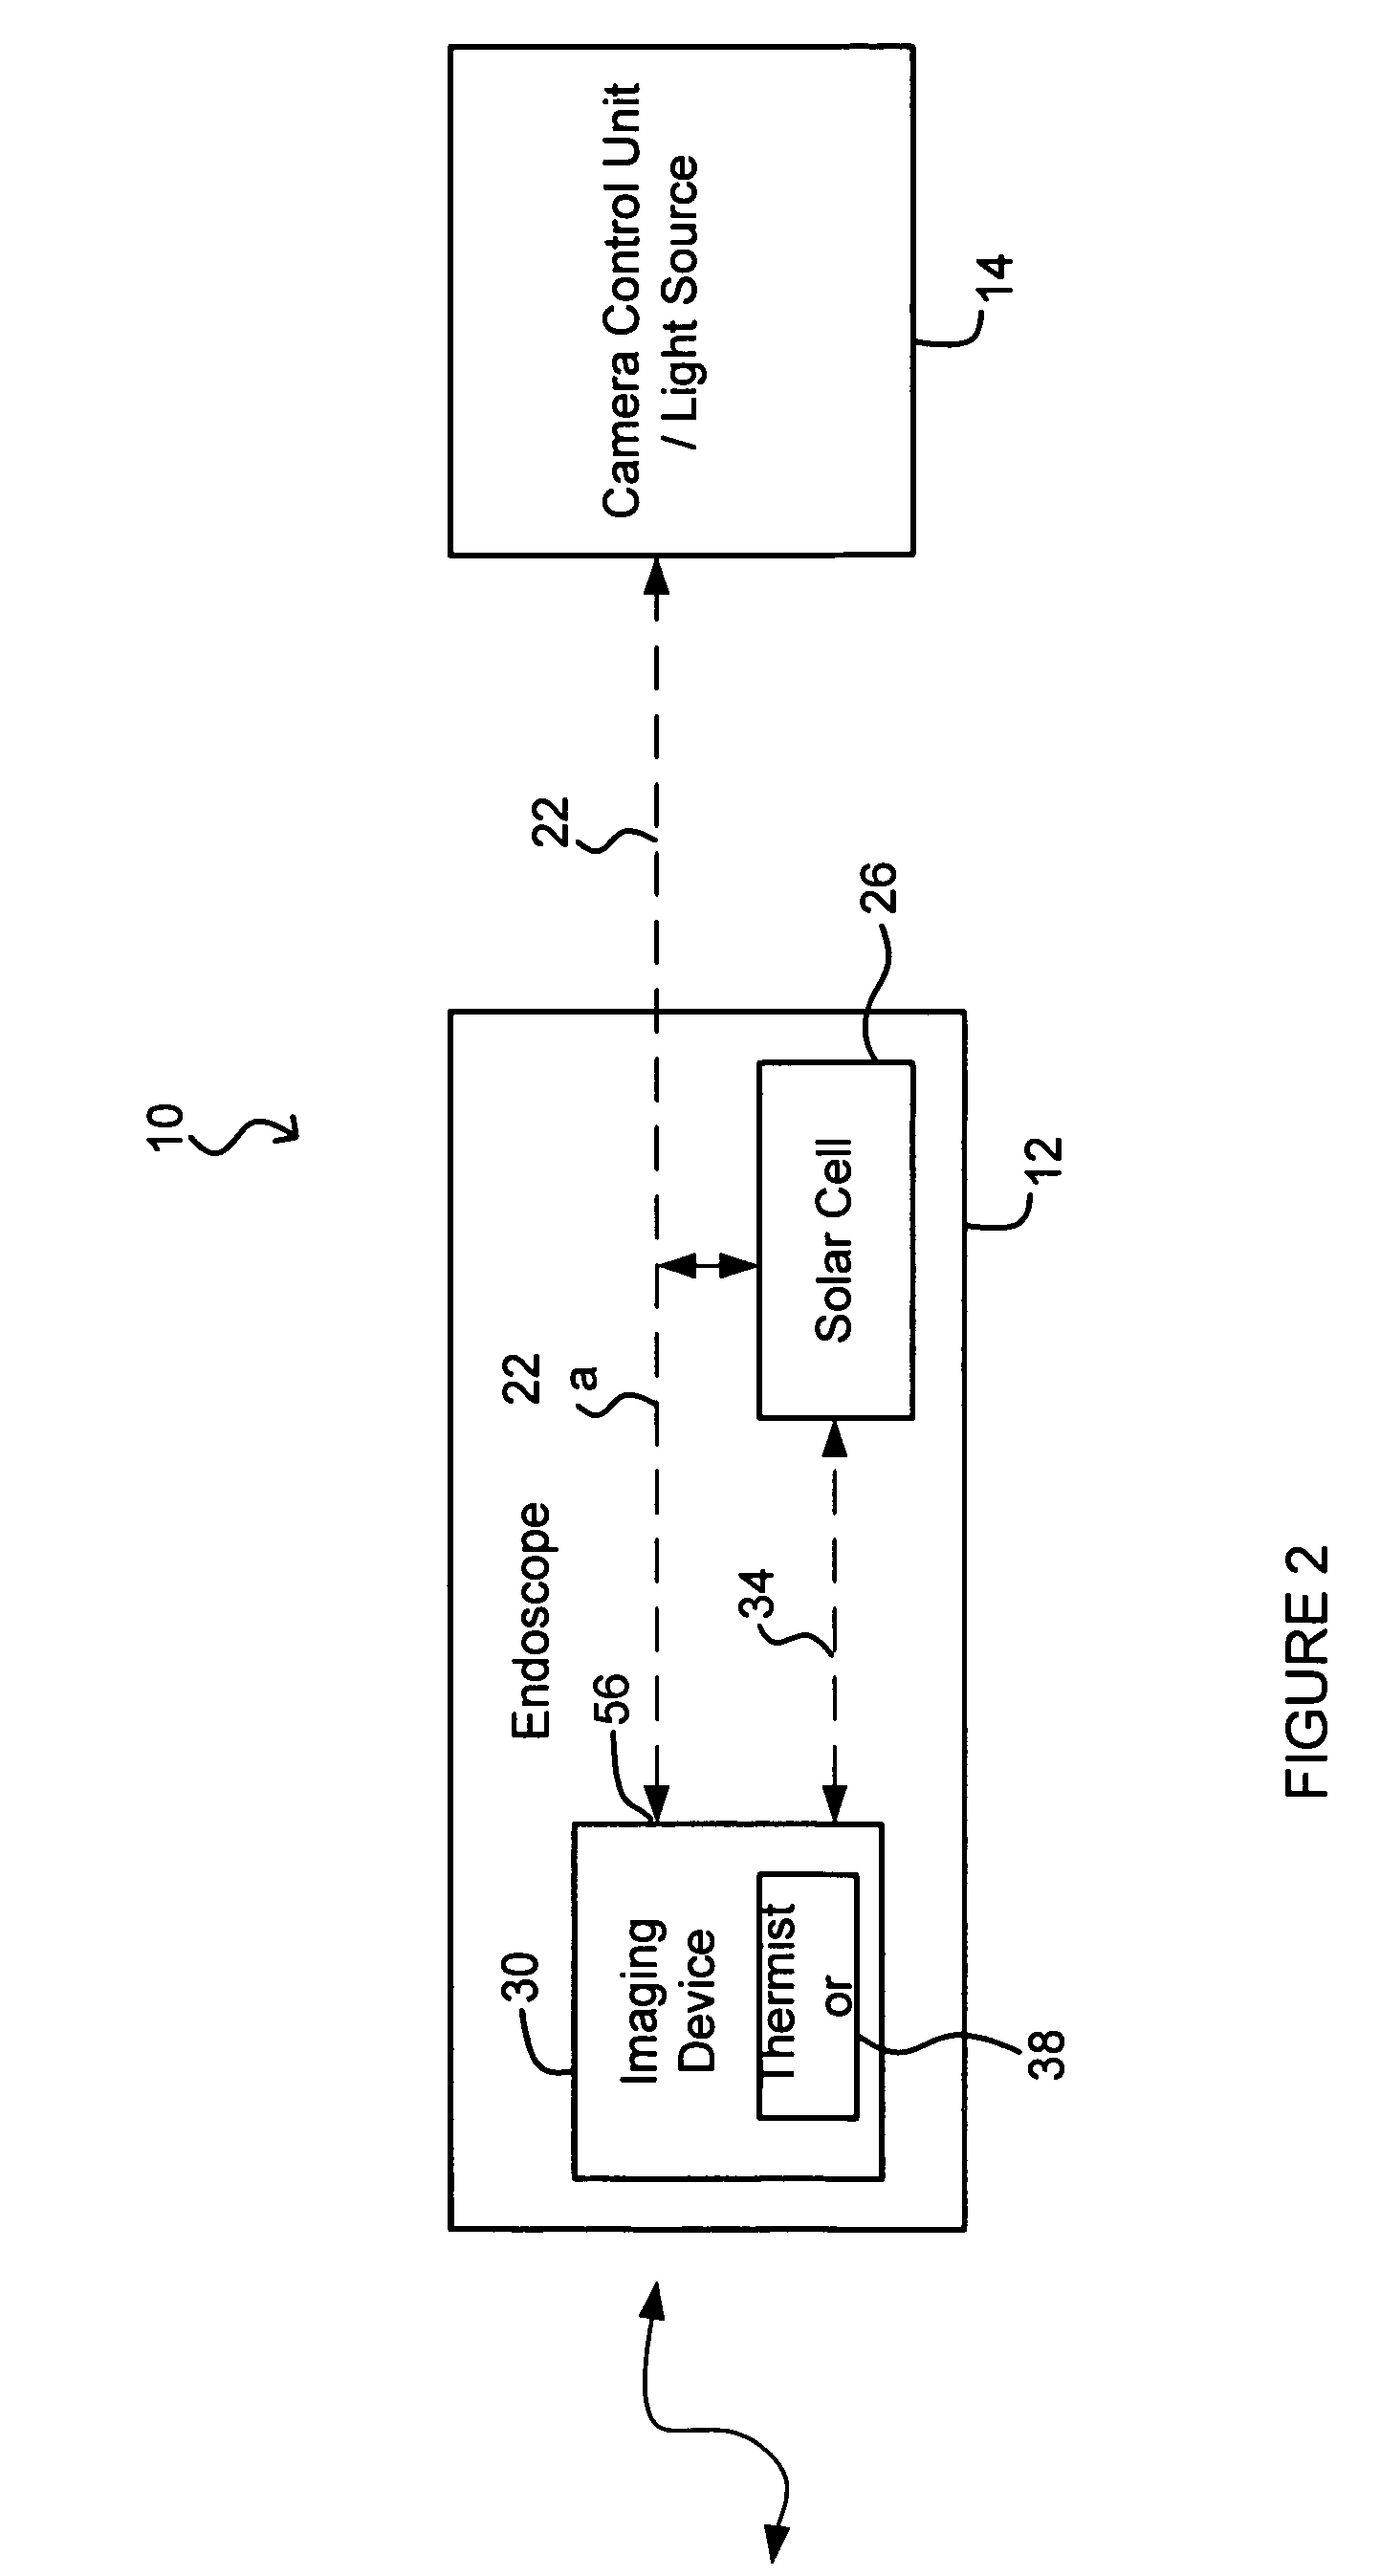 Optically coupled endoscope with microchip